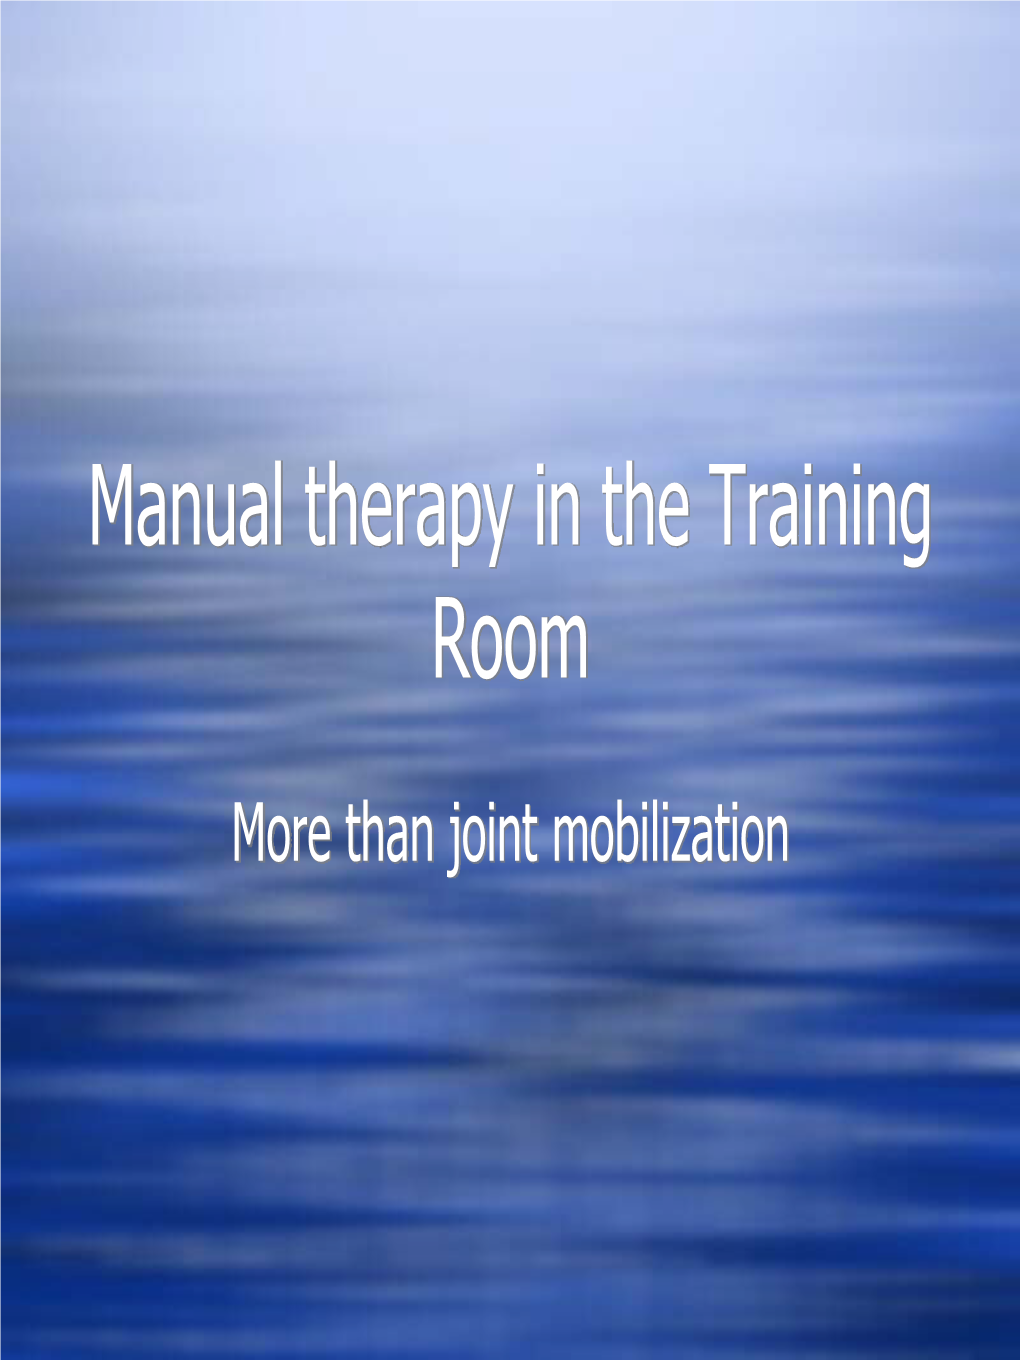 Manual Therapy in the Training Room